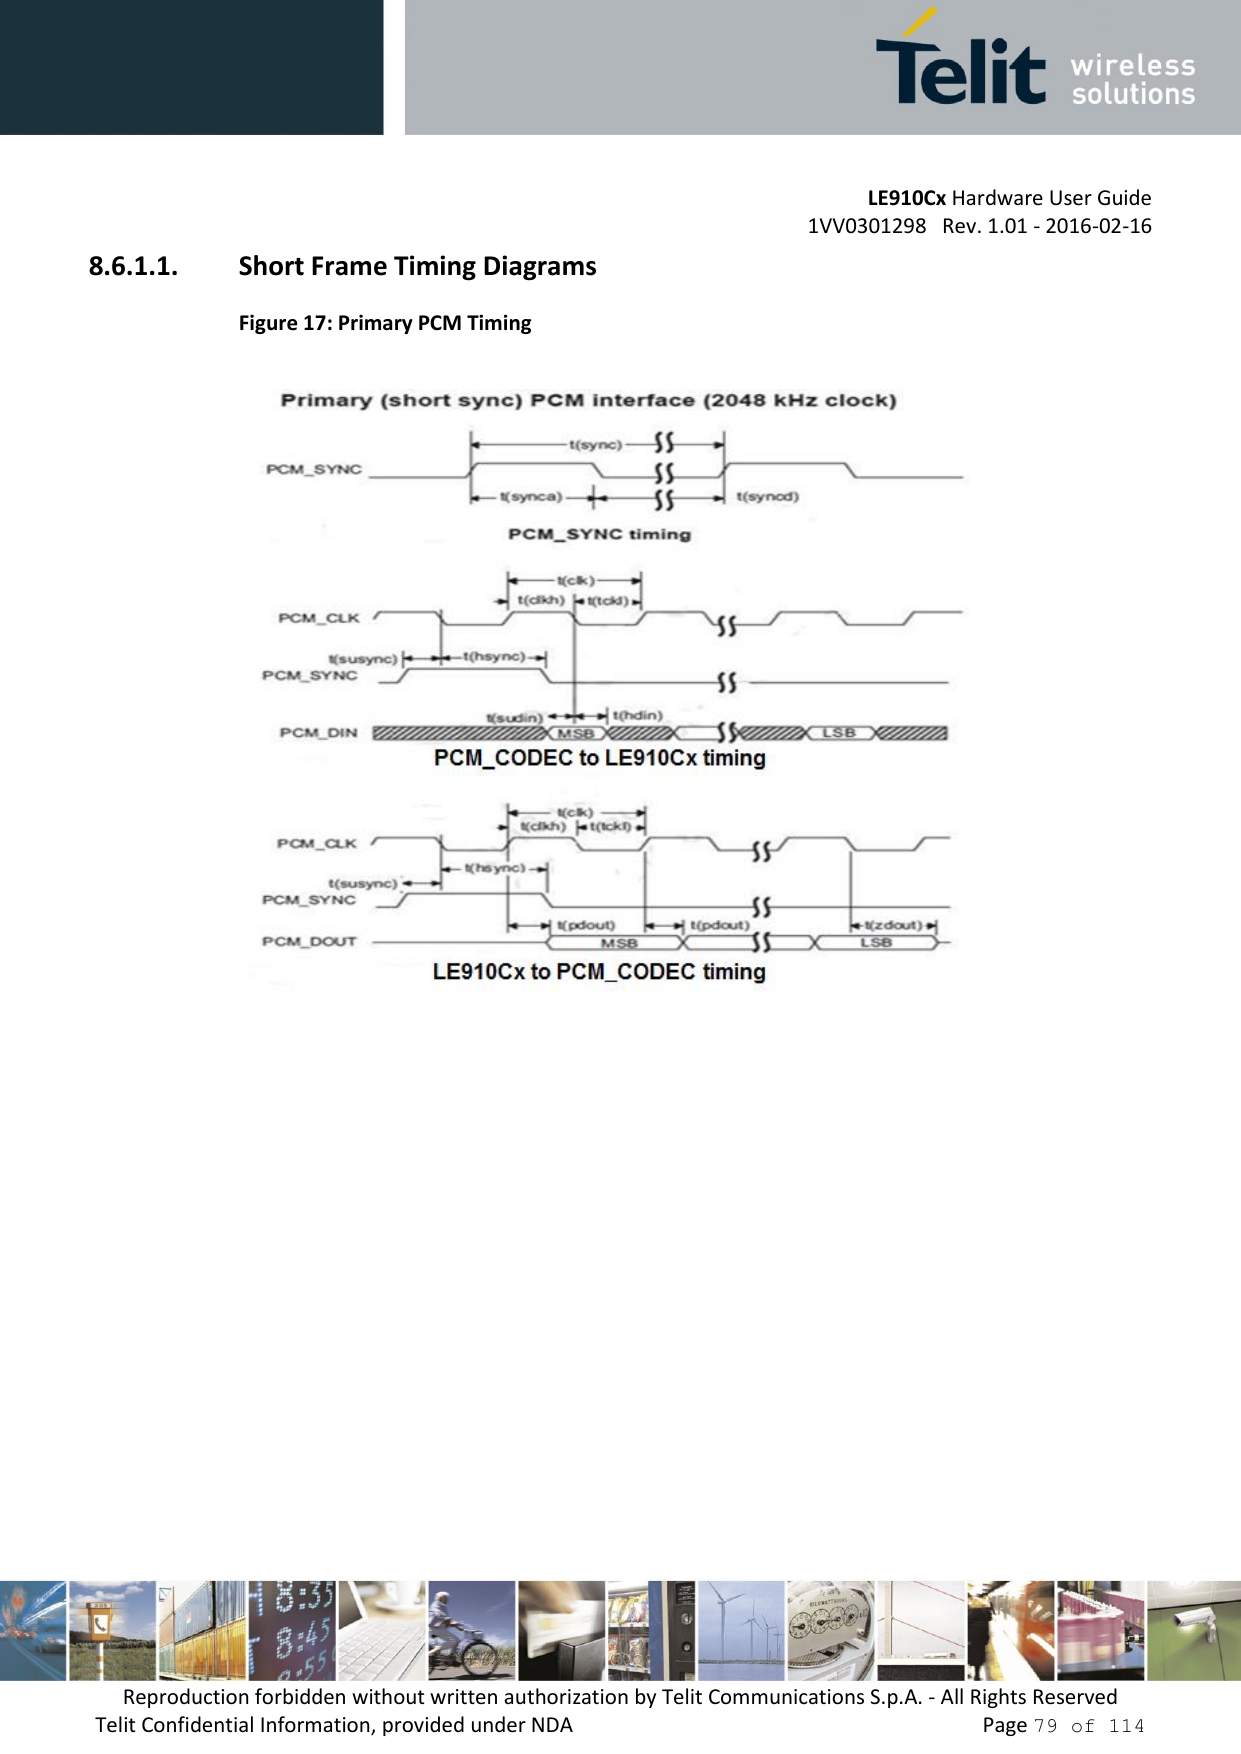 LE910Cx Hardware User Guide 1VV0301298   Rev. 1.01 - 2016-02-16 Reproduction forbidden without written authorization by Telit Communications S.p.A. - All Rights Reserved Telit Confidential Information, provided under NDA   Page 79 of 114 8.6.1.1. Short Frame Timing Diagrams Figure 17: Primary PCM Timing 